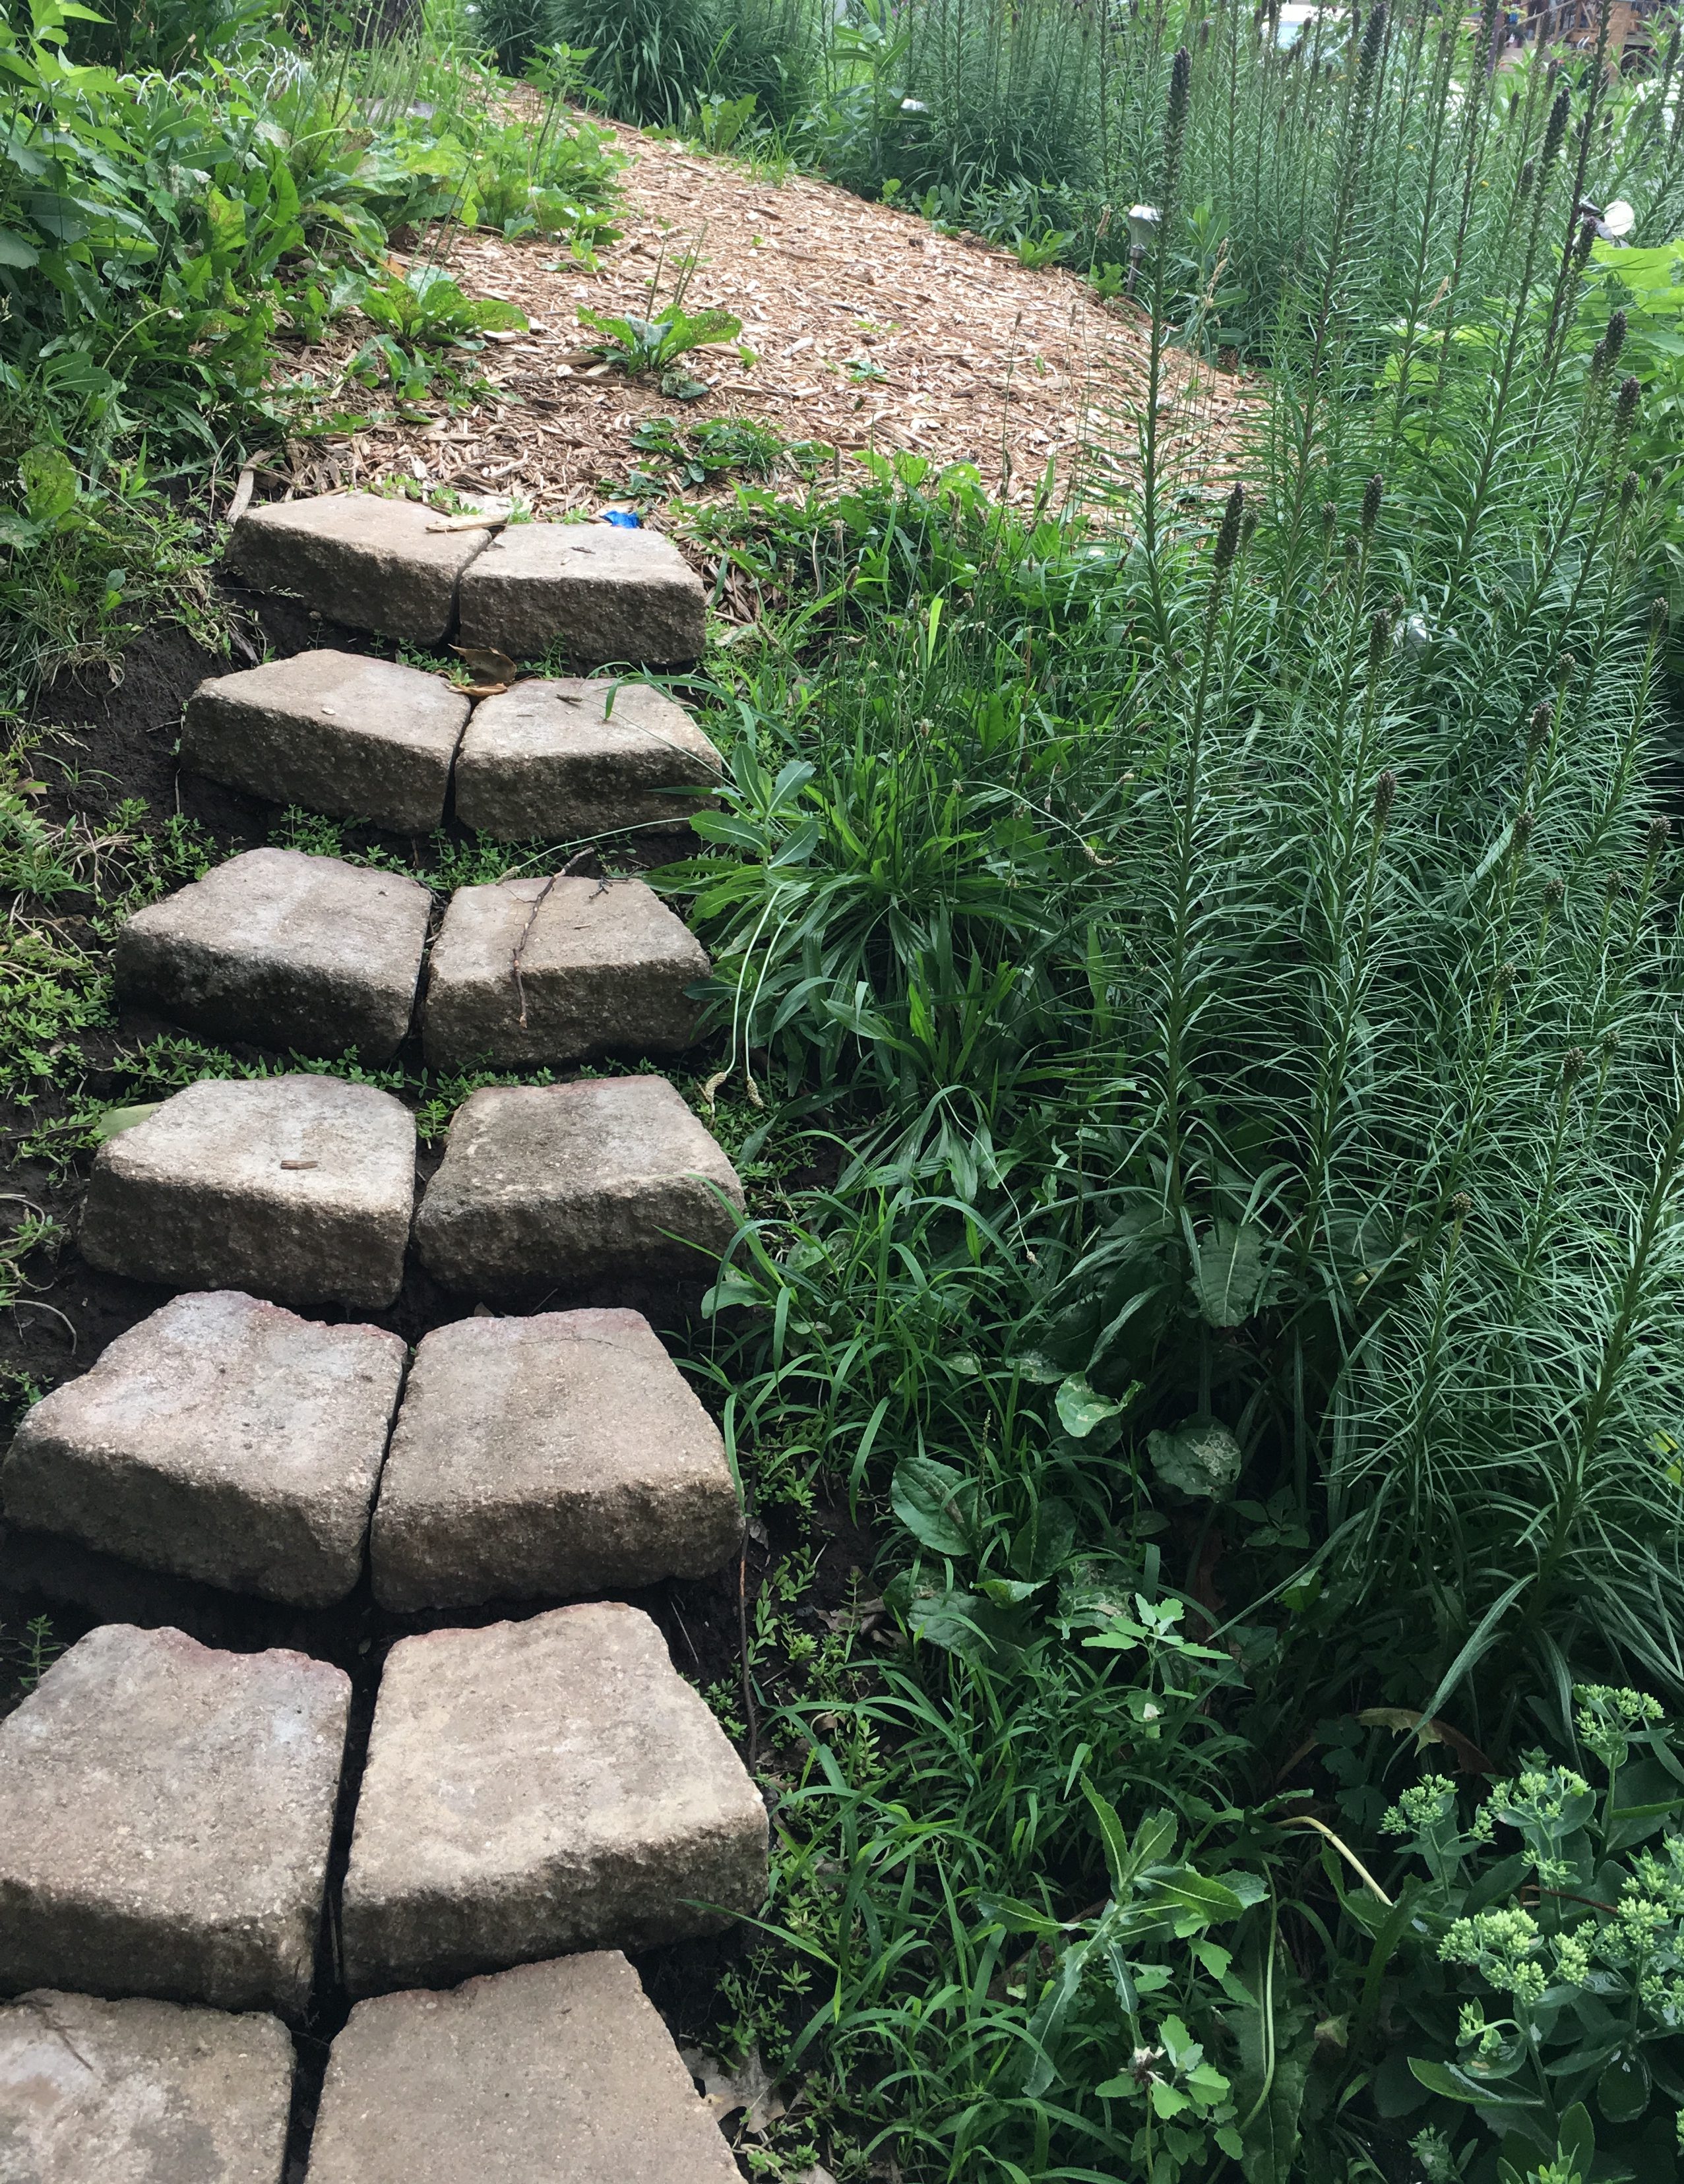 A homemade stone foot path wanders up a slight hill surrounded by tall feathery stalks of liatris. This is from my front yard when I was too poor to travel, I could always do something clever with my yard. All photography on this page is by Sarah Carpenter except where noted.